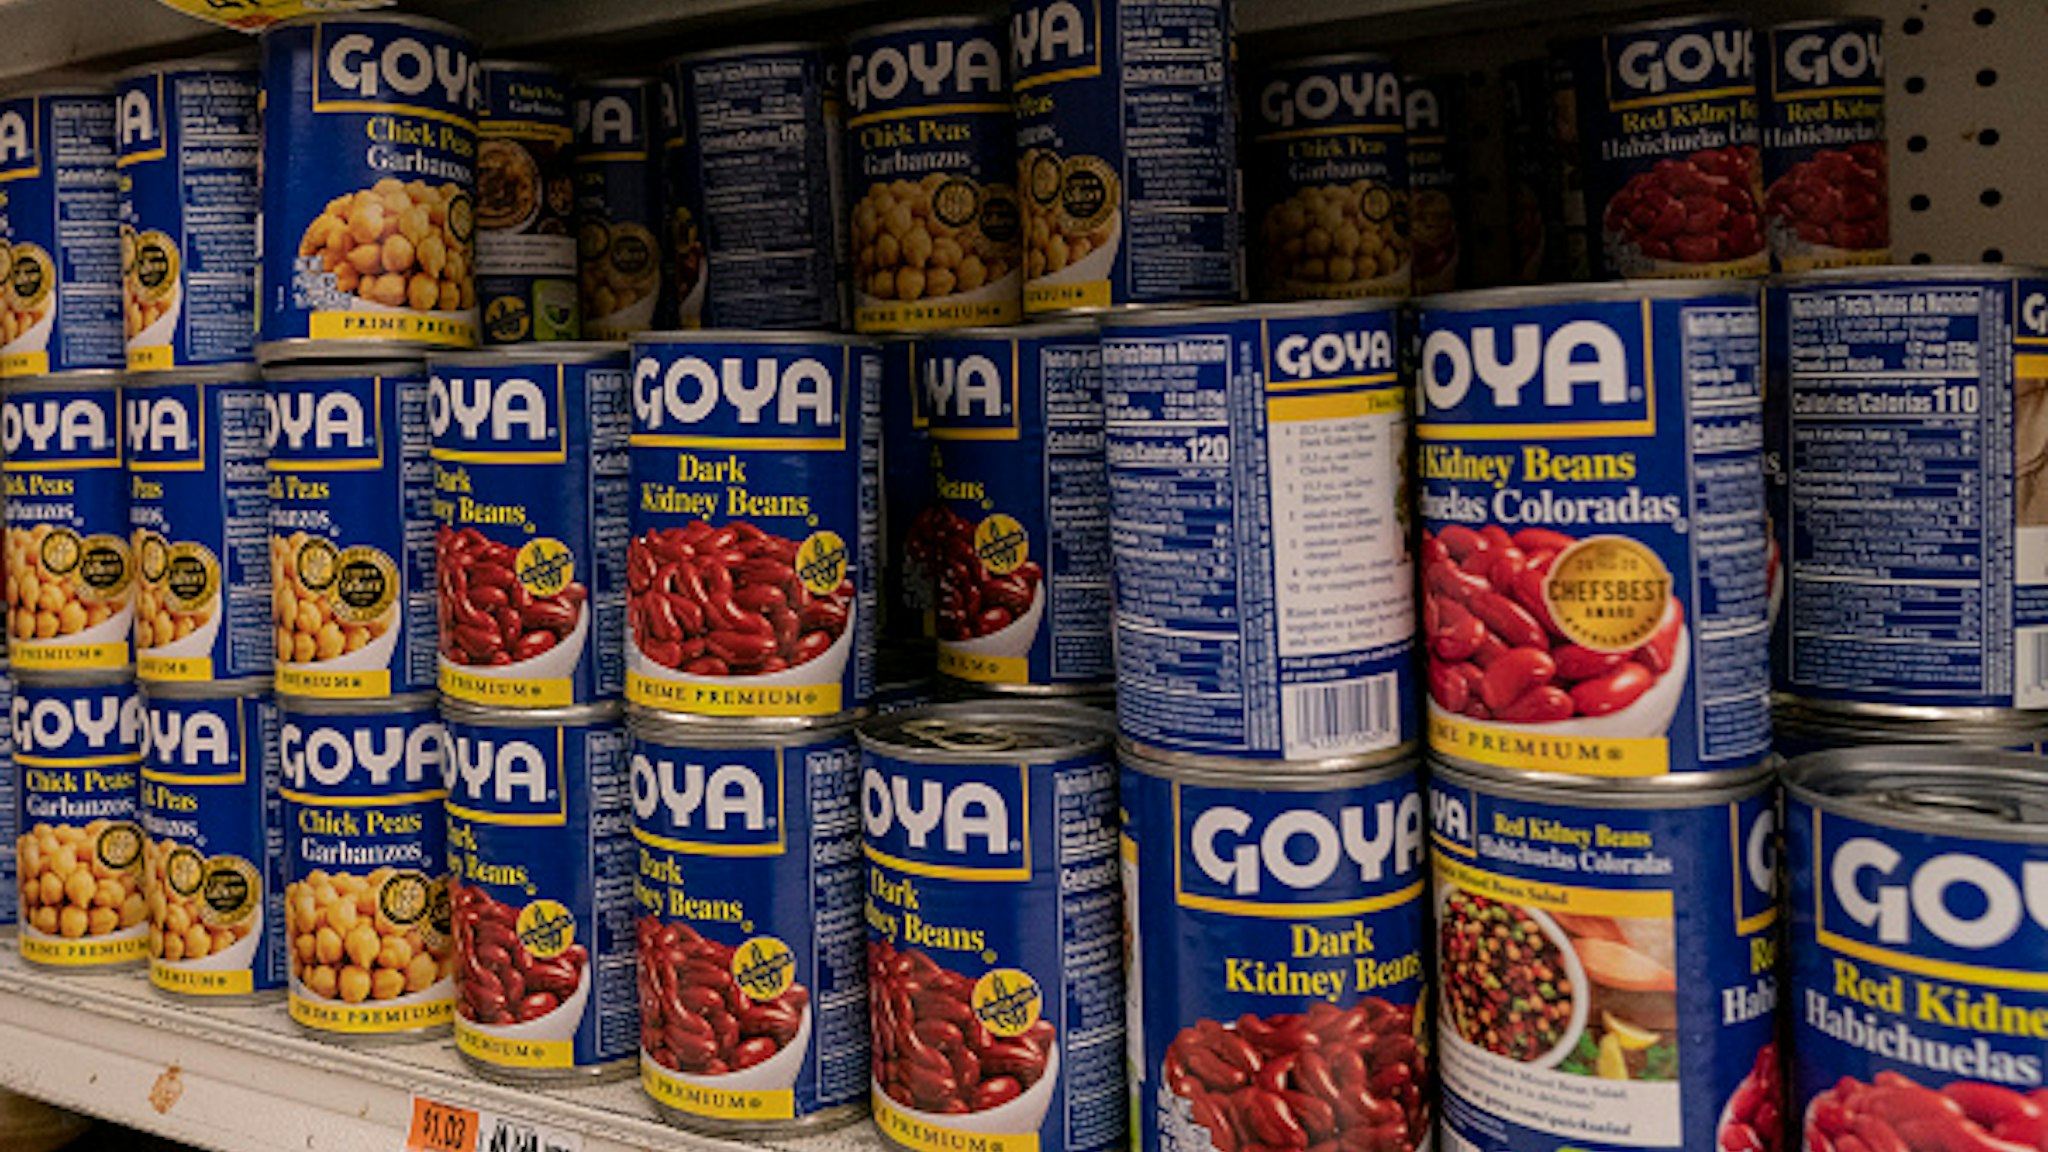 NEW YORK, UNITED STATES - 2020/07/10: Products by Goya Foods Company seen on shelves of Stop&amp;Shop supermarket in the Bronx as company boycott takes off after Robert Unanue, CEO of Goya Foods, appeared in the White House Rose Garden and praised President Donald Trump. Hashtag #Goyaway is trending on social media since July 10, 2020. Unanue said he will not apologize and called the movement suppression of speech. He also claimed a double standard in the reaction to his remarks about President Trump reminding that he did similar event with Michelle Obama in 2012.